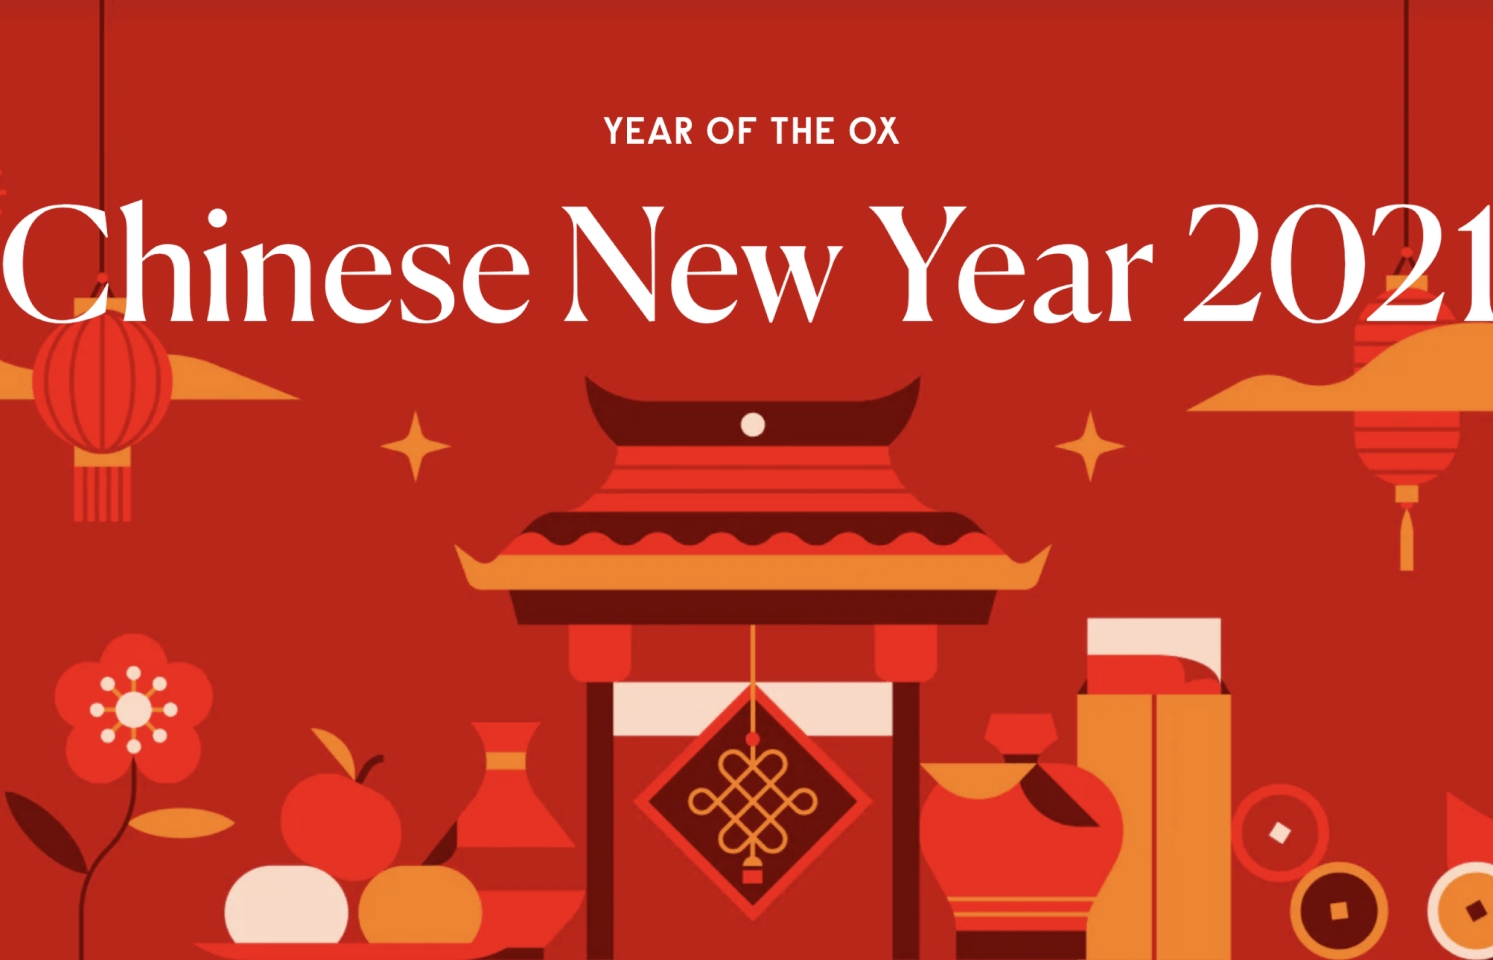 lunar new year significance tradition celebration of the fifth day